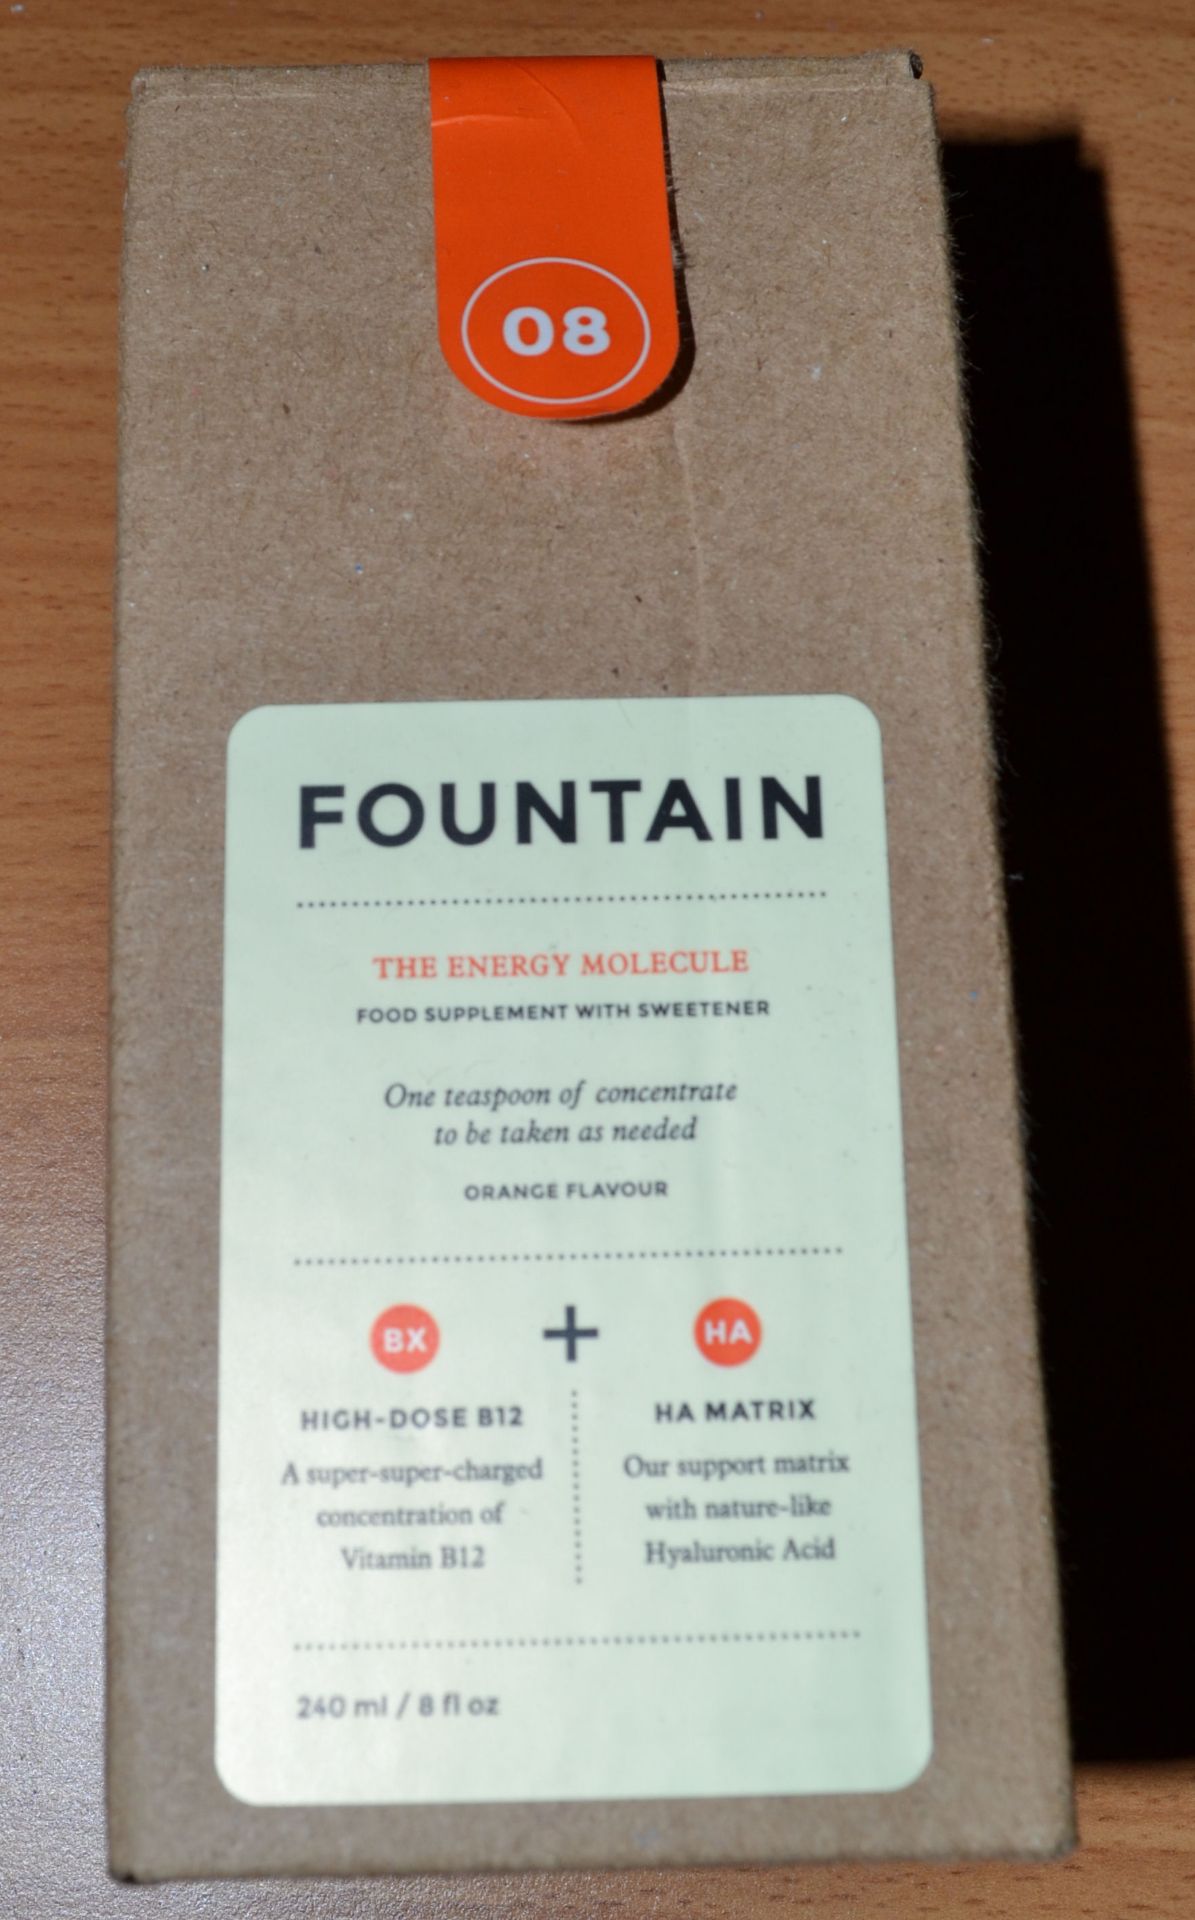 10 x 240ml Bottles of Fountain, The Energy Molecule Supplement - New & Boxed - CL185 - Ref: DRT0643 - Image 4 of 7